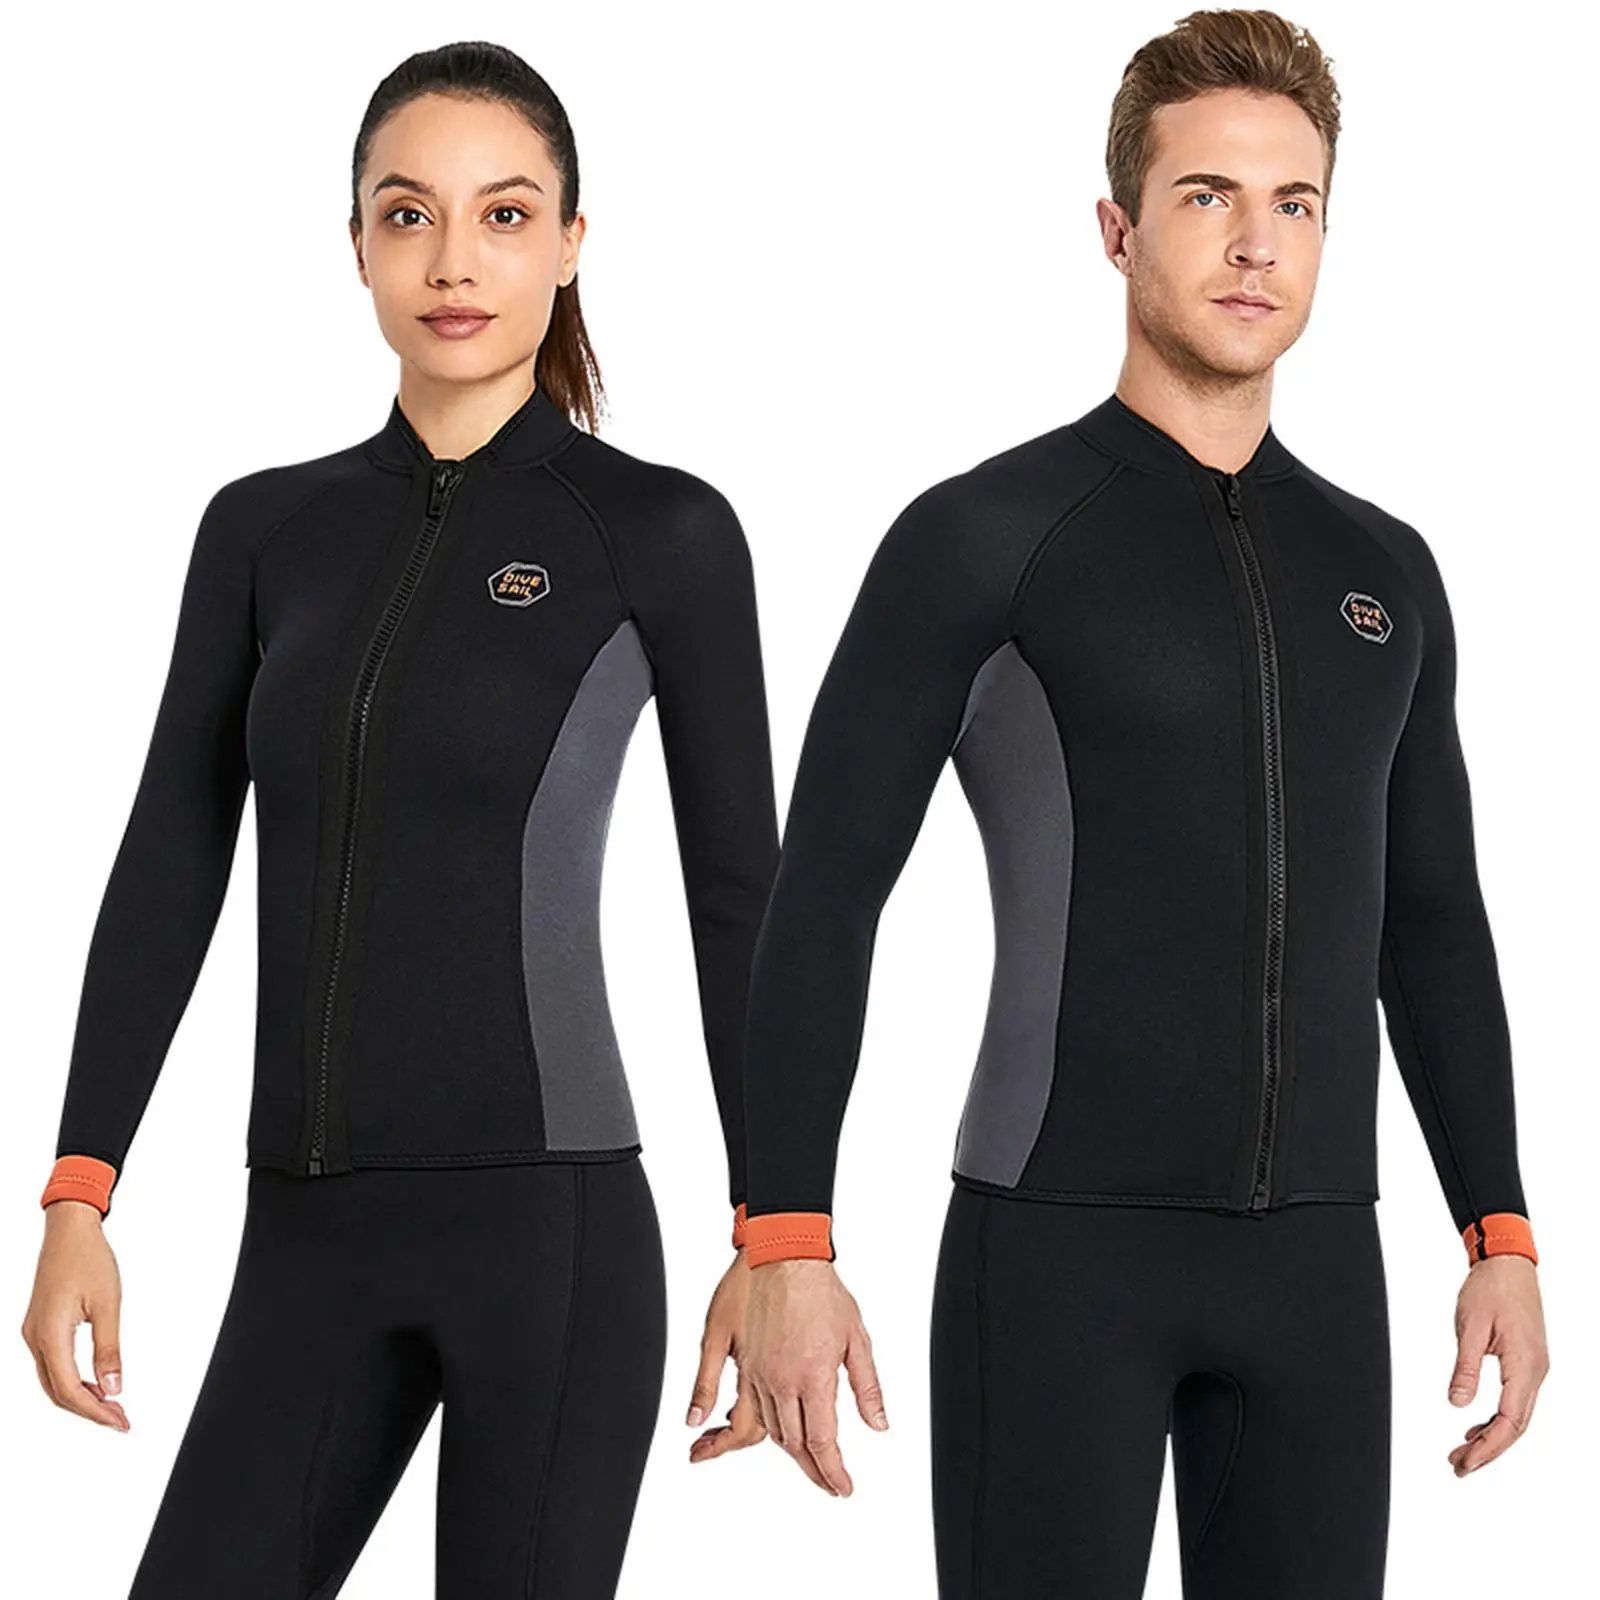 3mm Neoprene Wetsuit Tops Diving Sports Suit Long Sleeve Swimsuits Swimming Swimwear for Water Sports Scuba Diving Snorkeling